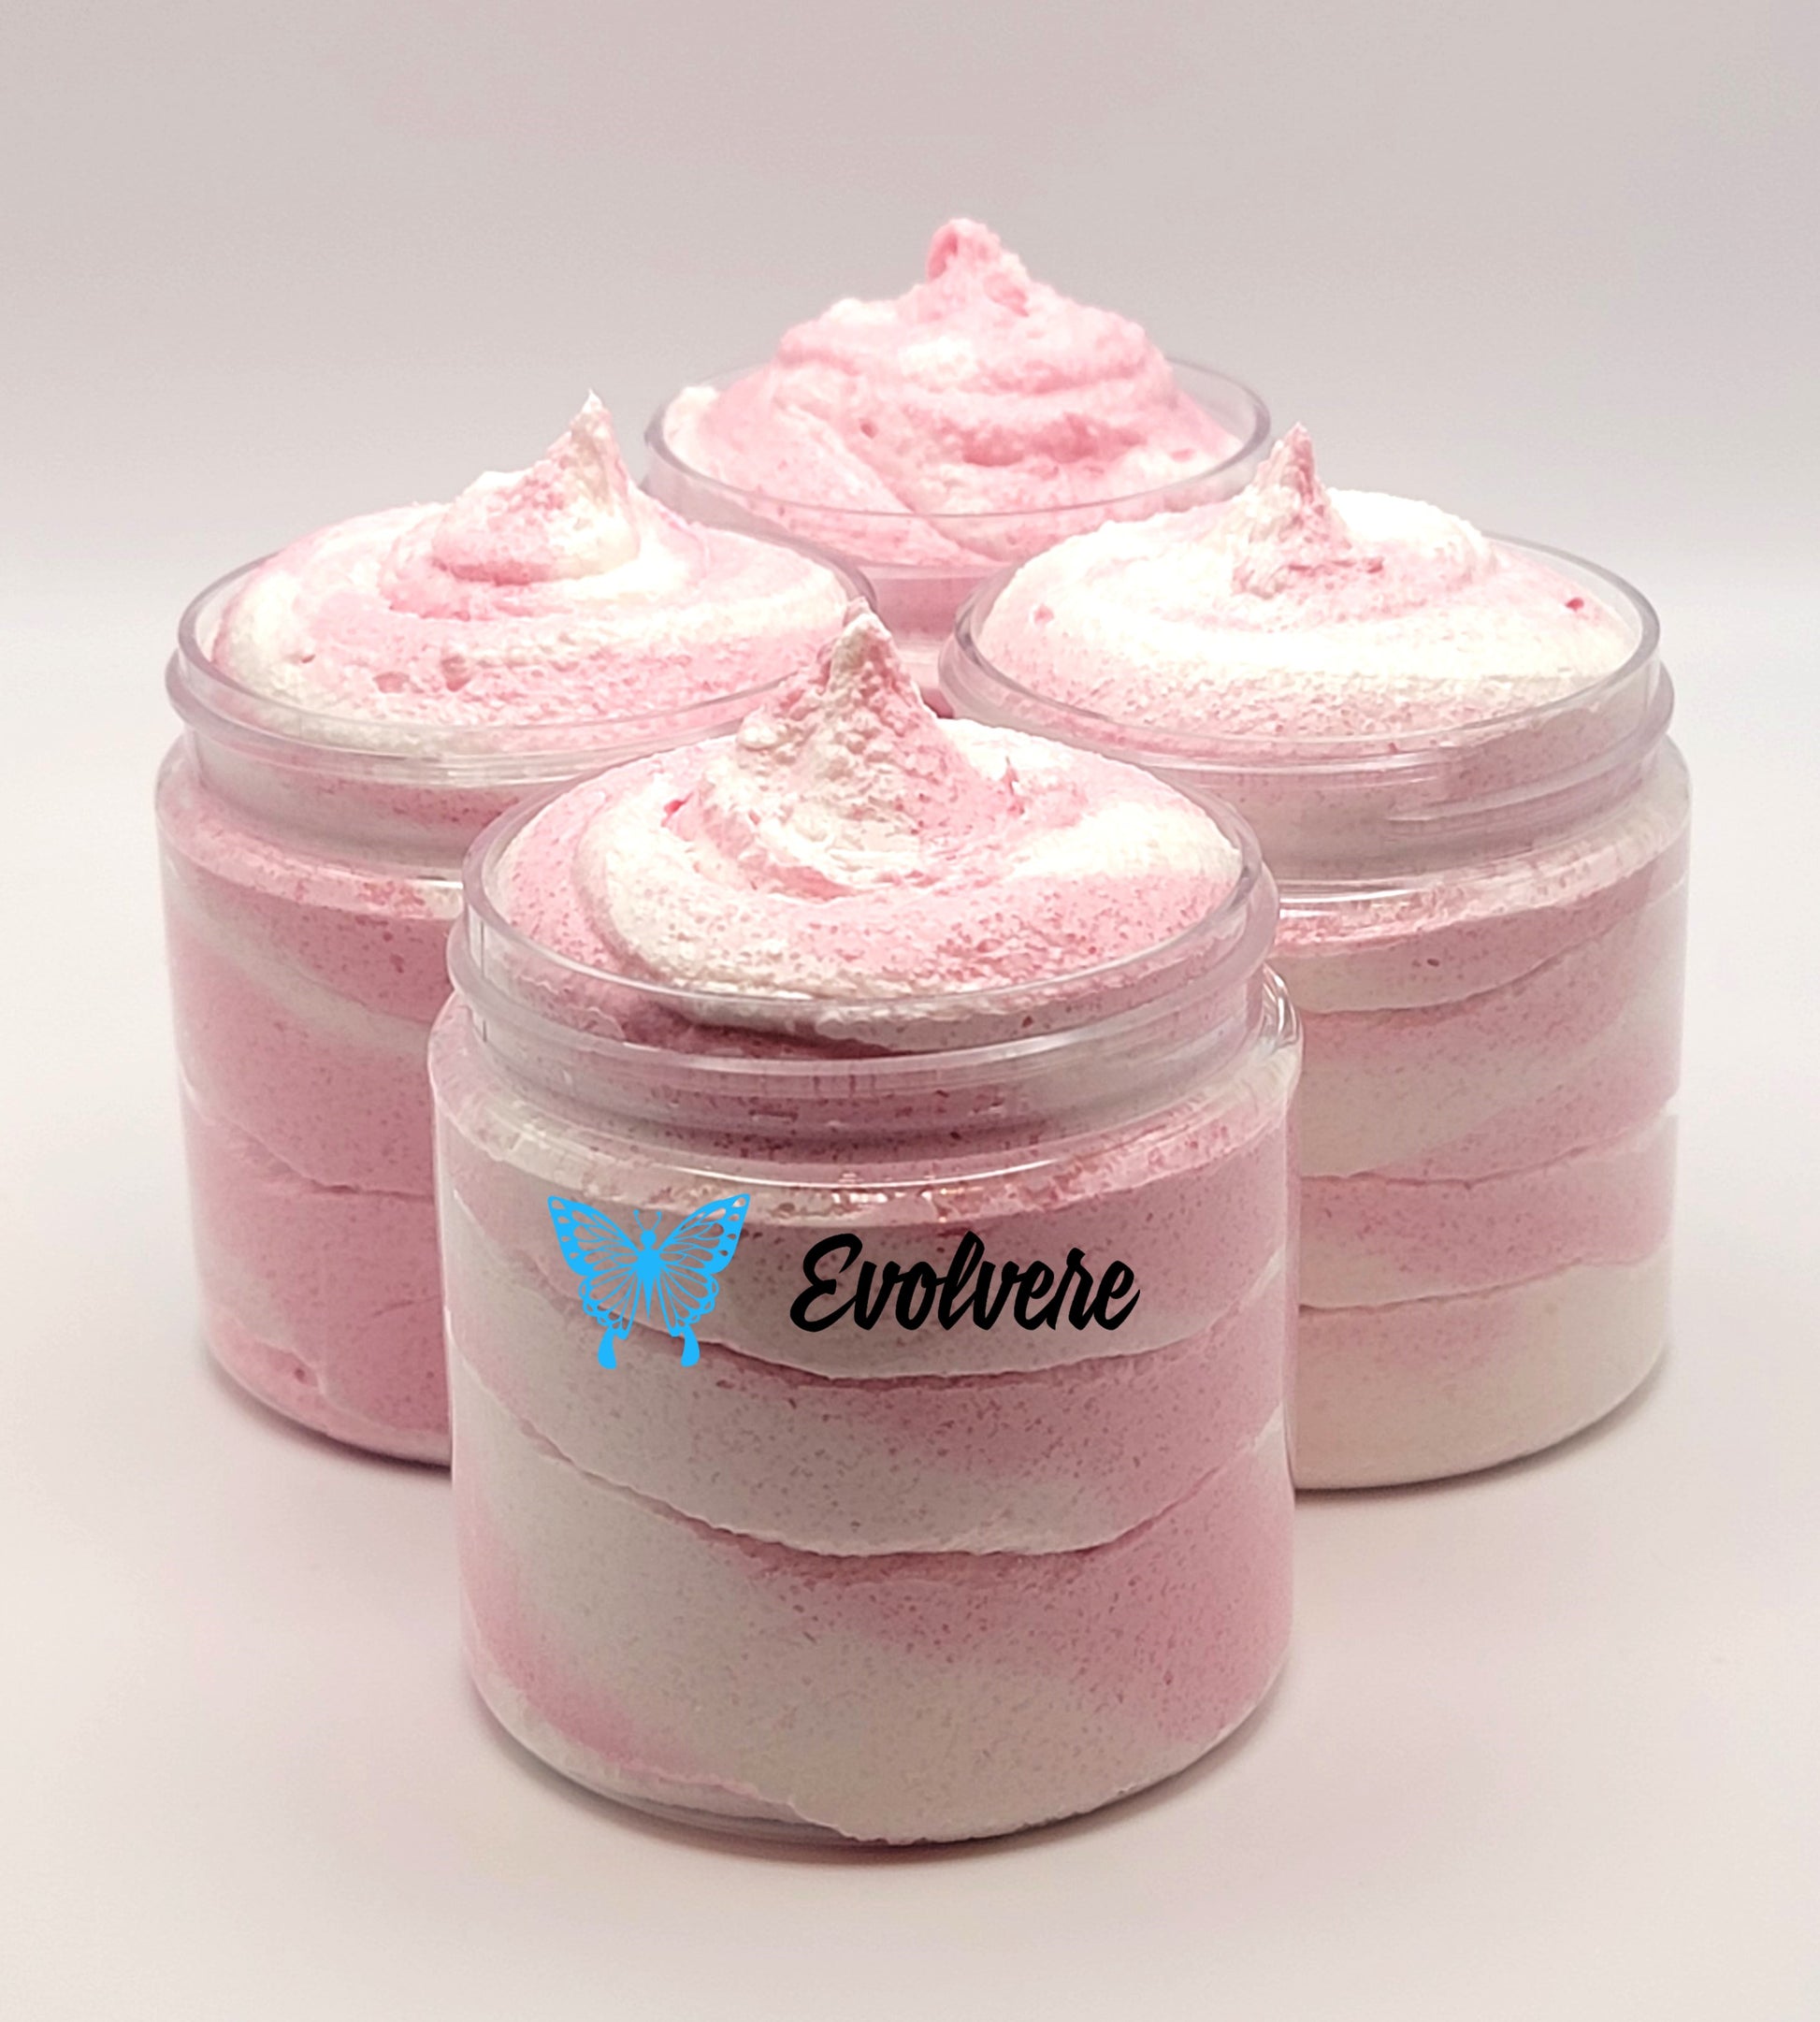 4 jars filled with pink and white swirled foaming sugar scrub. Listing is for 1 jar. 